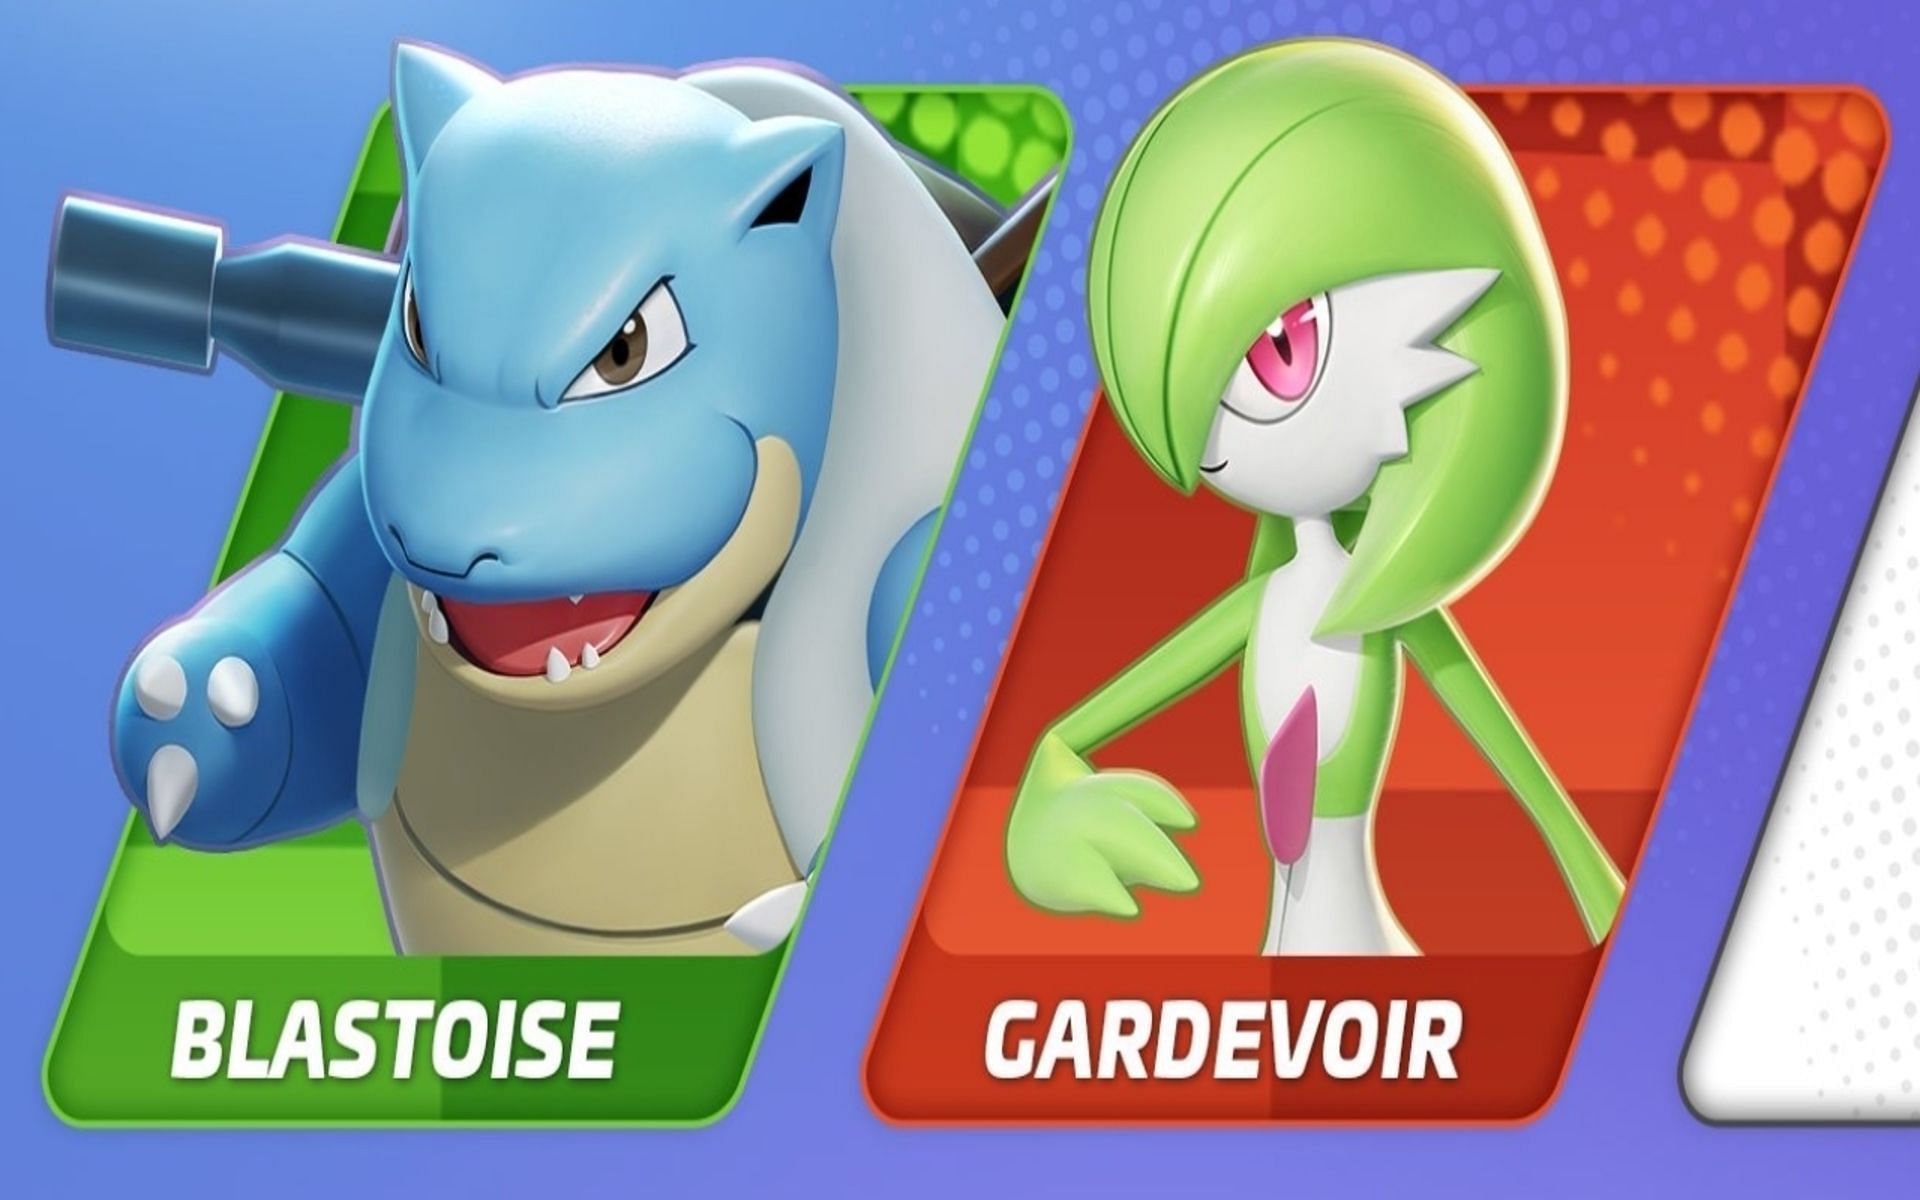 Both Blastoise and Gardevoir benefit from Energy Amplifier due to having great Unite moves (Image via TiMi studios)